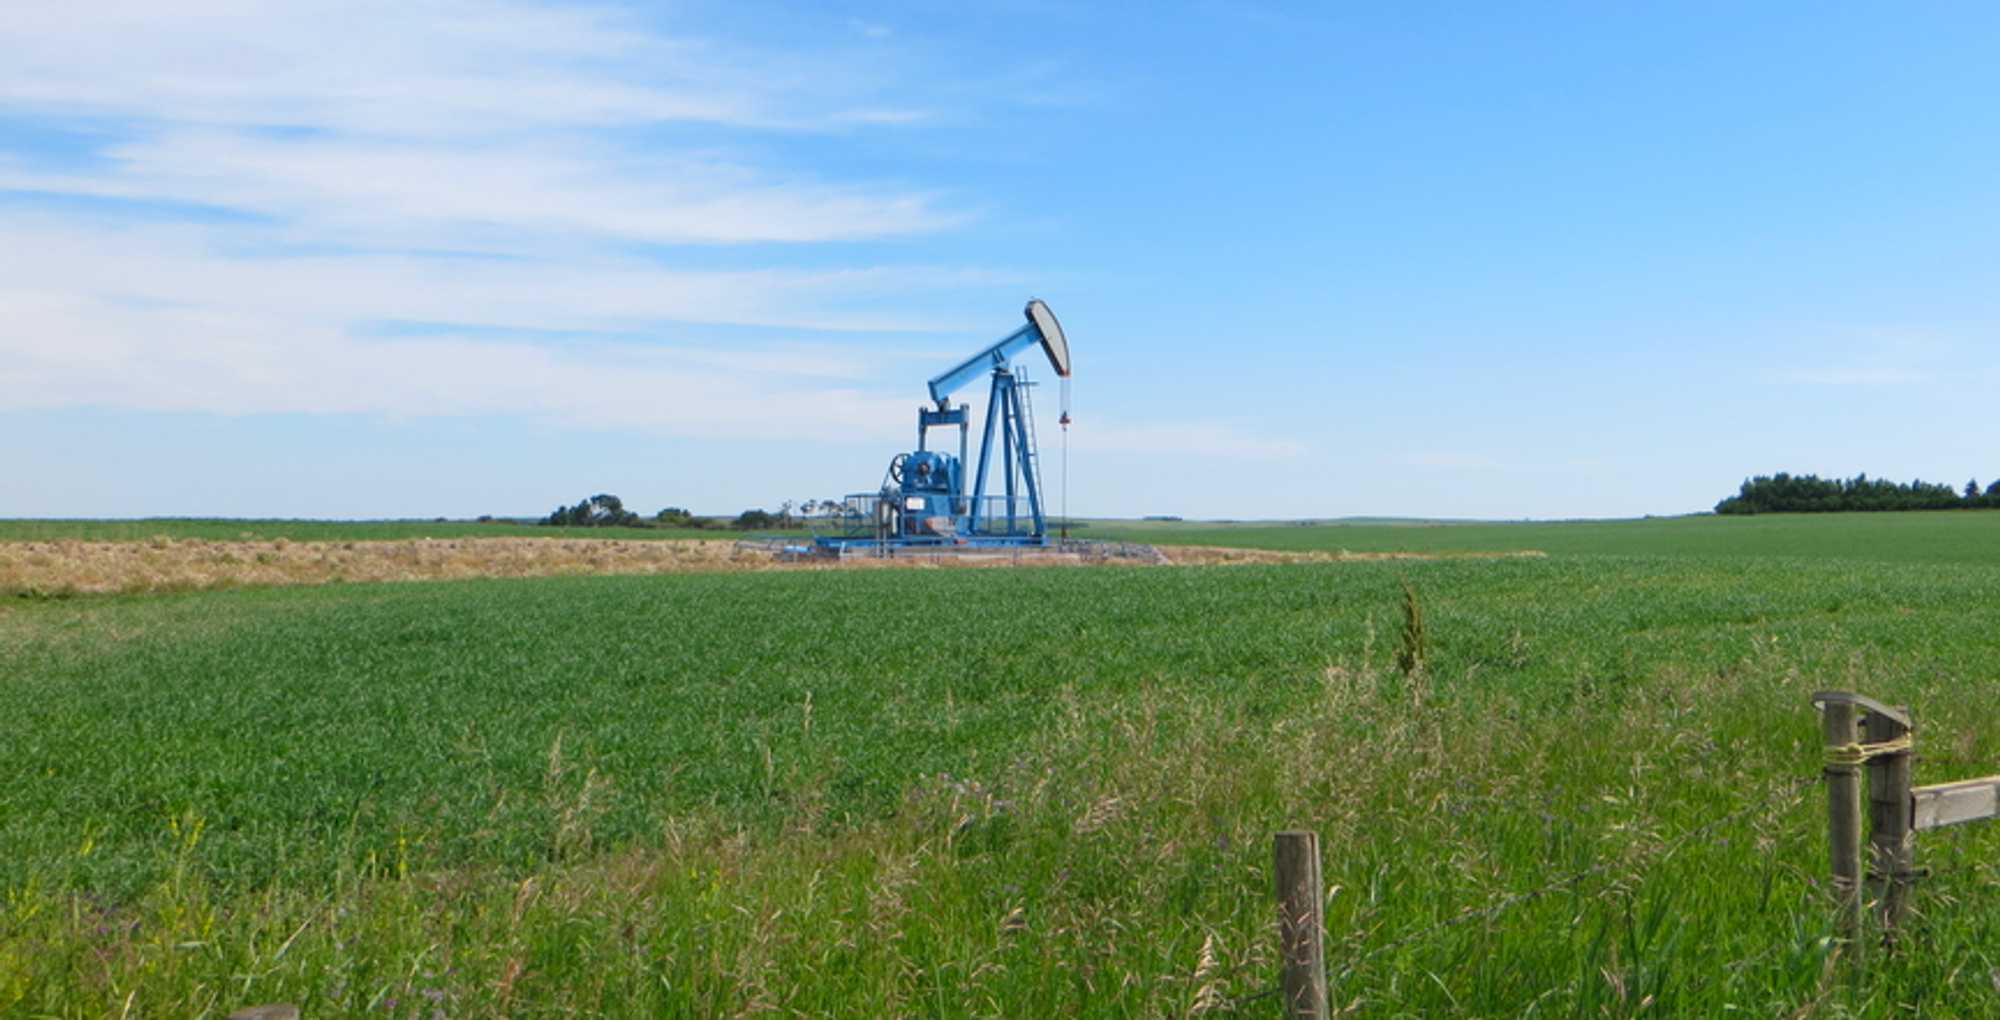 Old oil and gas wells find new life with renewable energy